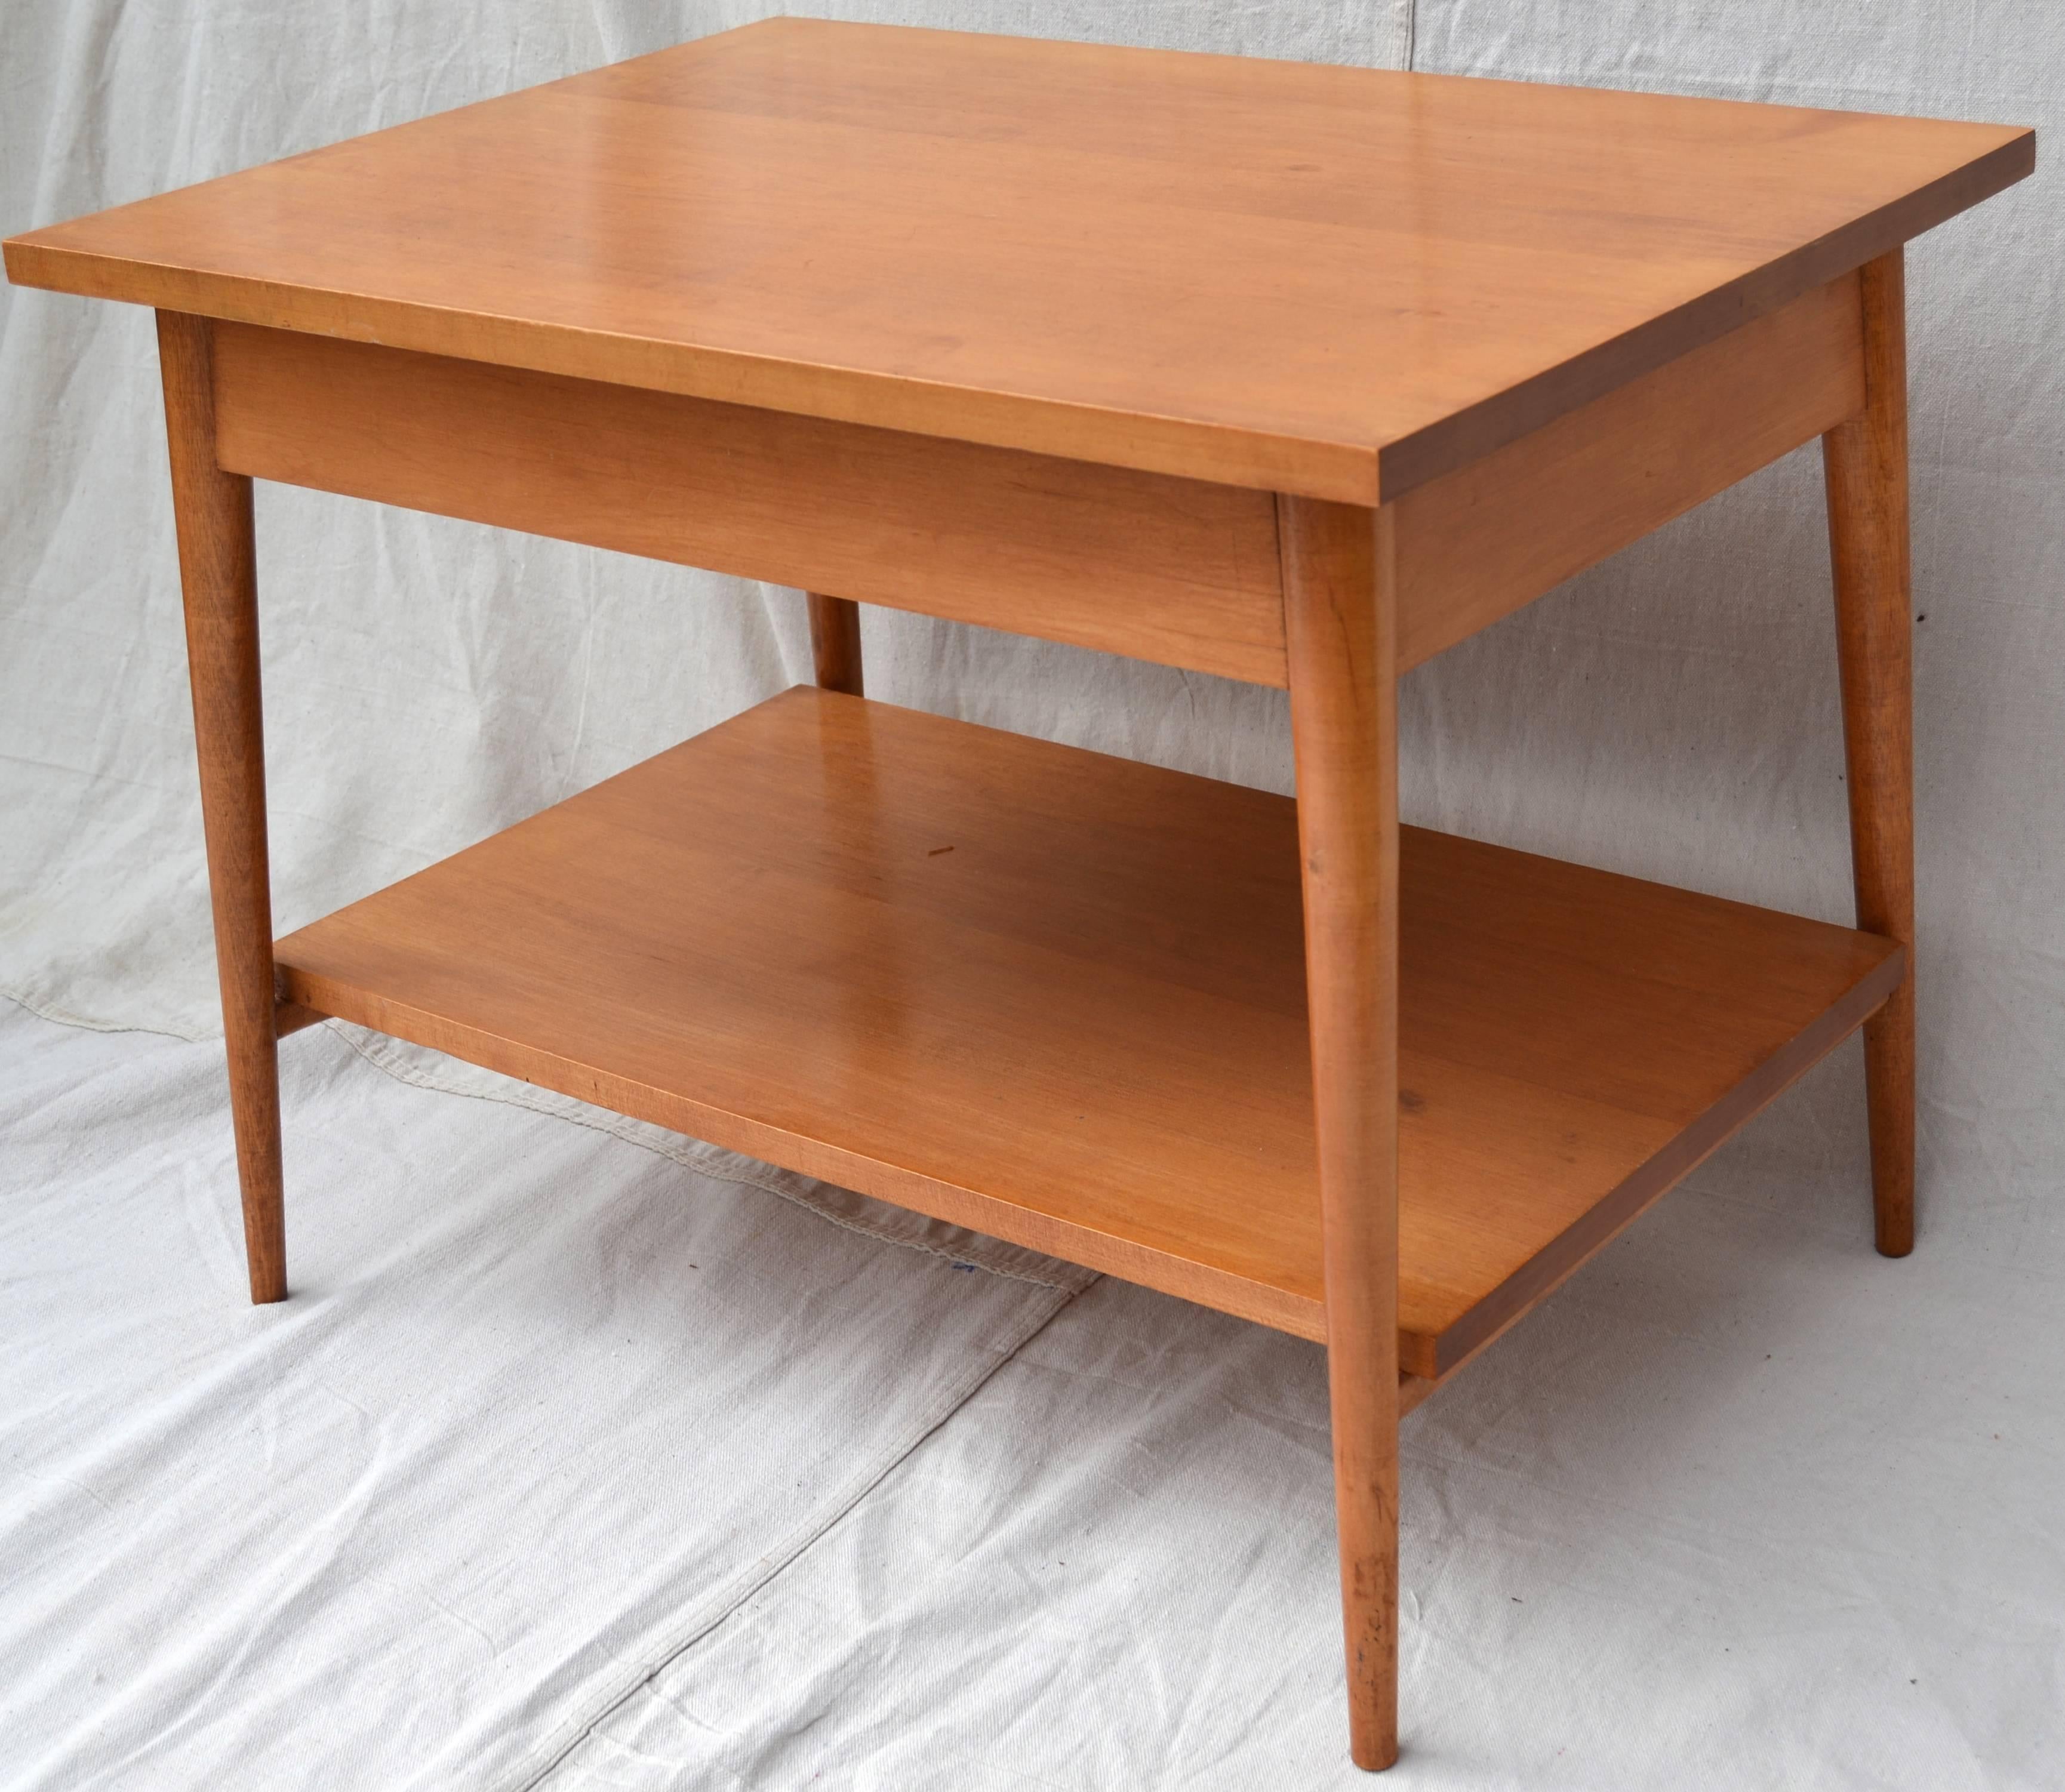 Pair of solid maple Paul McCobb single drawer tables or stands from the Planner Group manufactured by Winchendon. These useful, handsome and sturdy stands are in excellent original finish with the minor use wear. Original brass pulls and labels